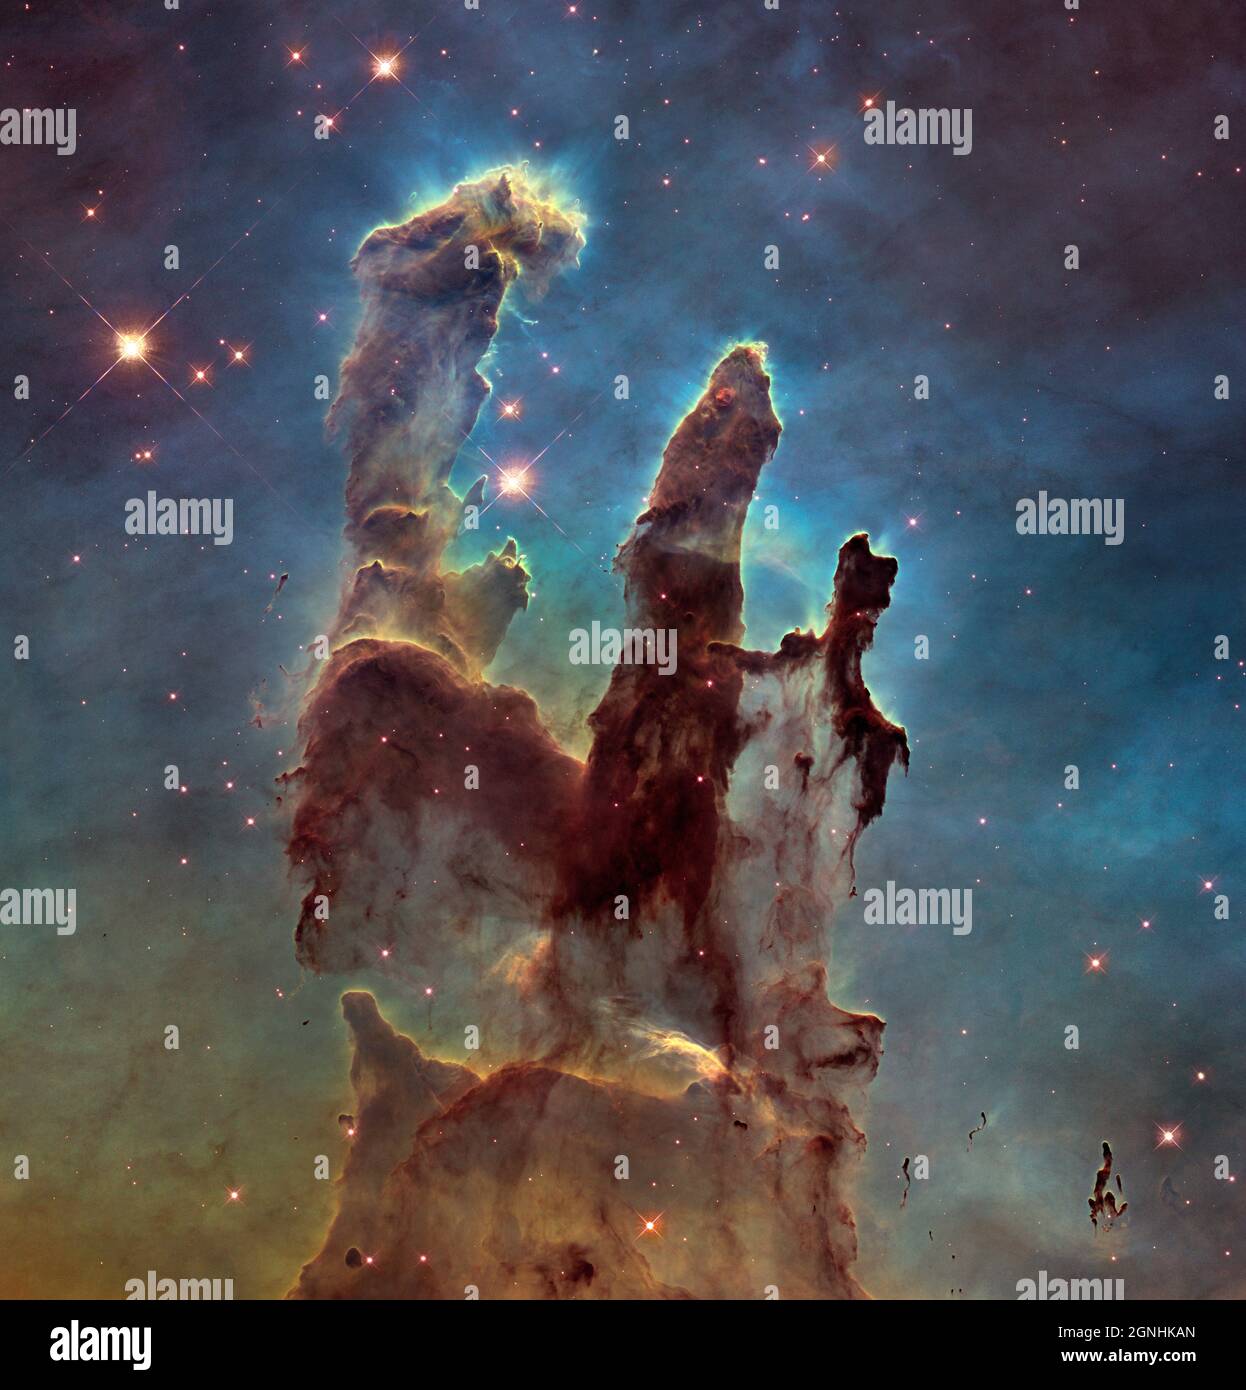 The famous Pillars of Creation,a part of a small region of the Eagle Nebula, a vast star-forming region 6,500 light-years from Earth.The colors in the image highlight emission from several chemical elements. Oxygen emission is blue, sulfur is orange, and hydrogen and nitrogen are green. . Image source NASA/ESA Hubble Space Telescope Stock Photo